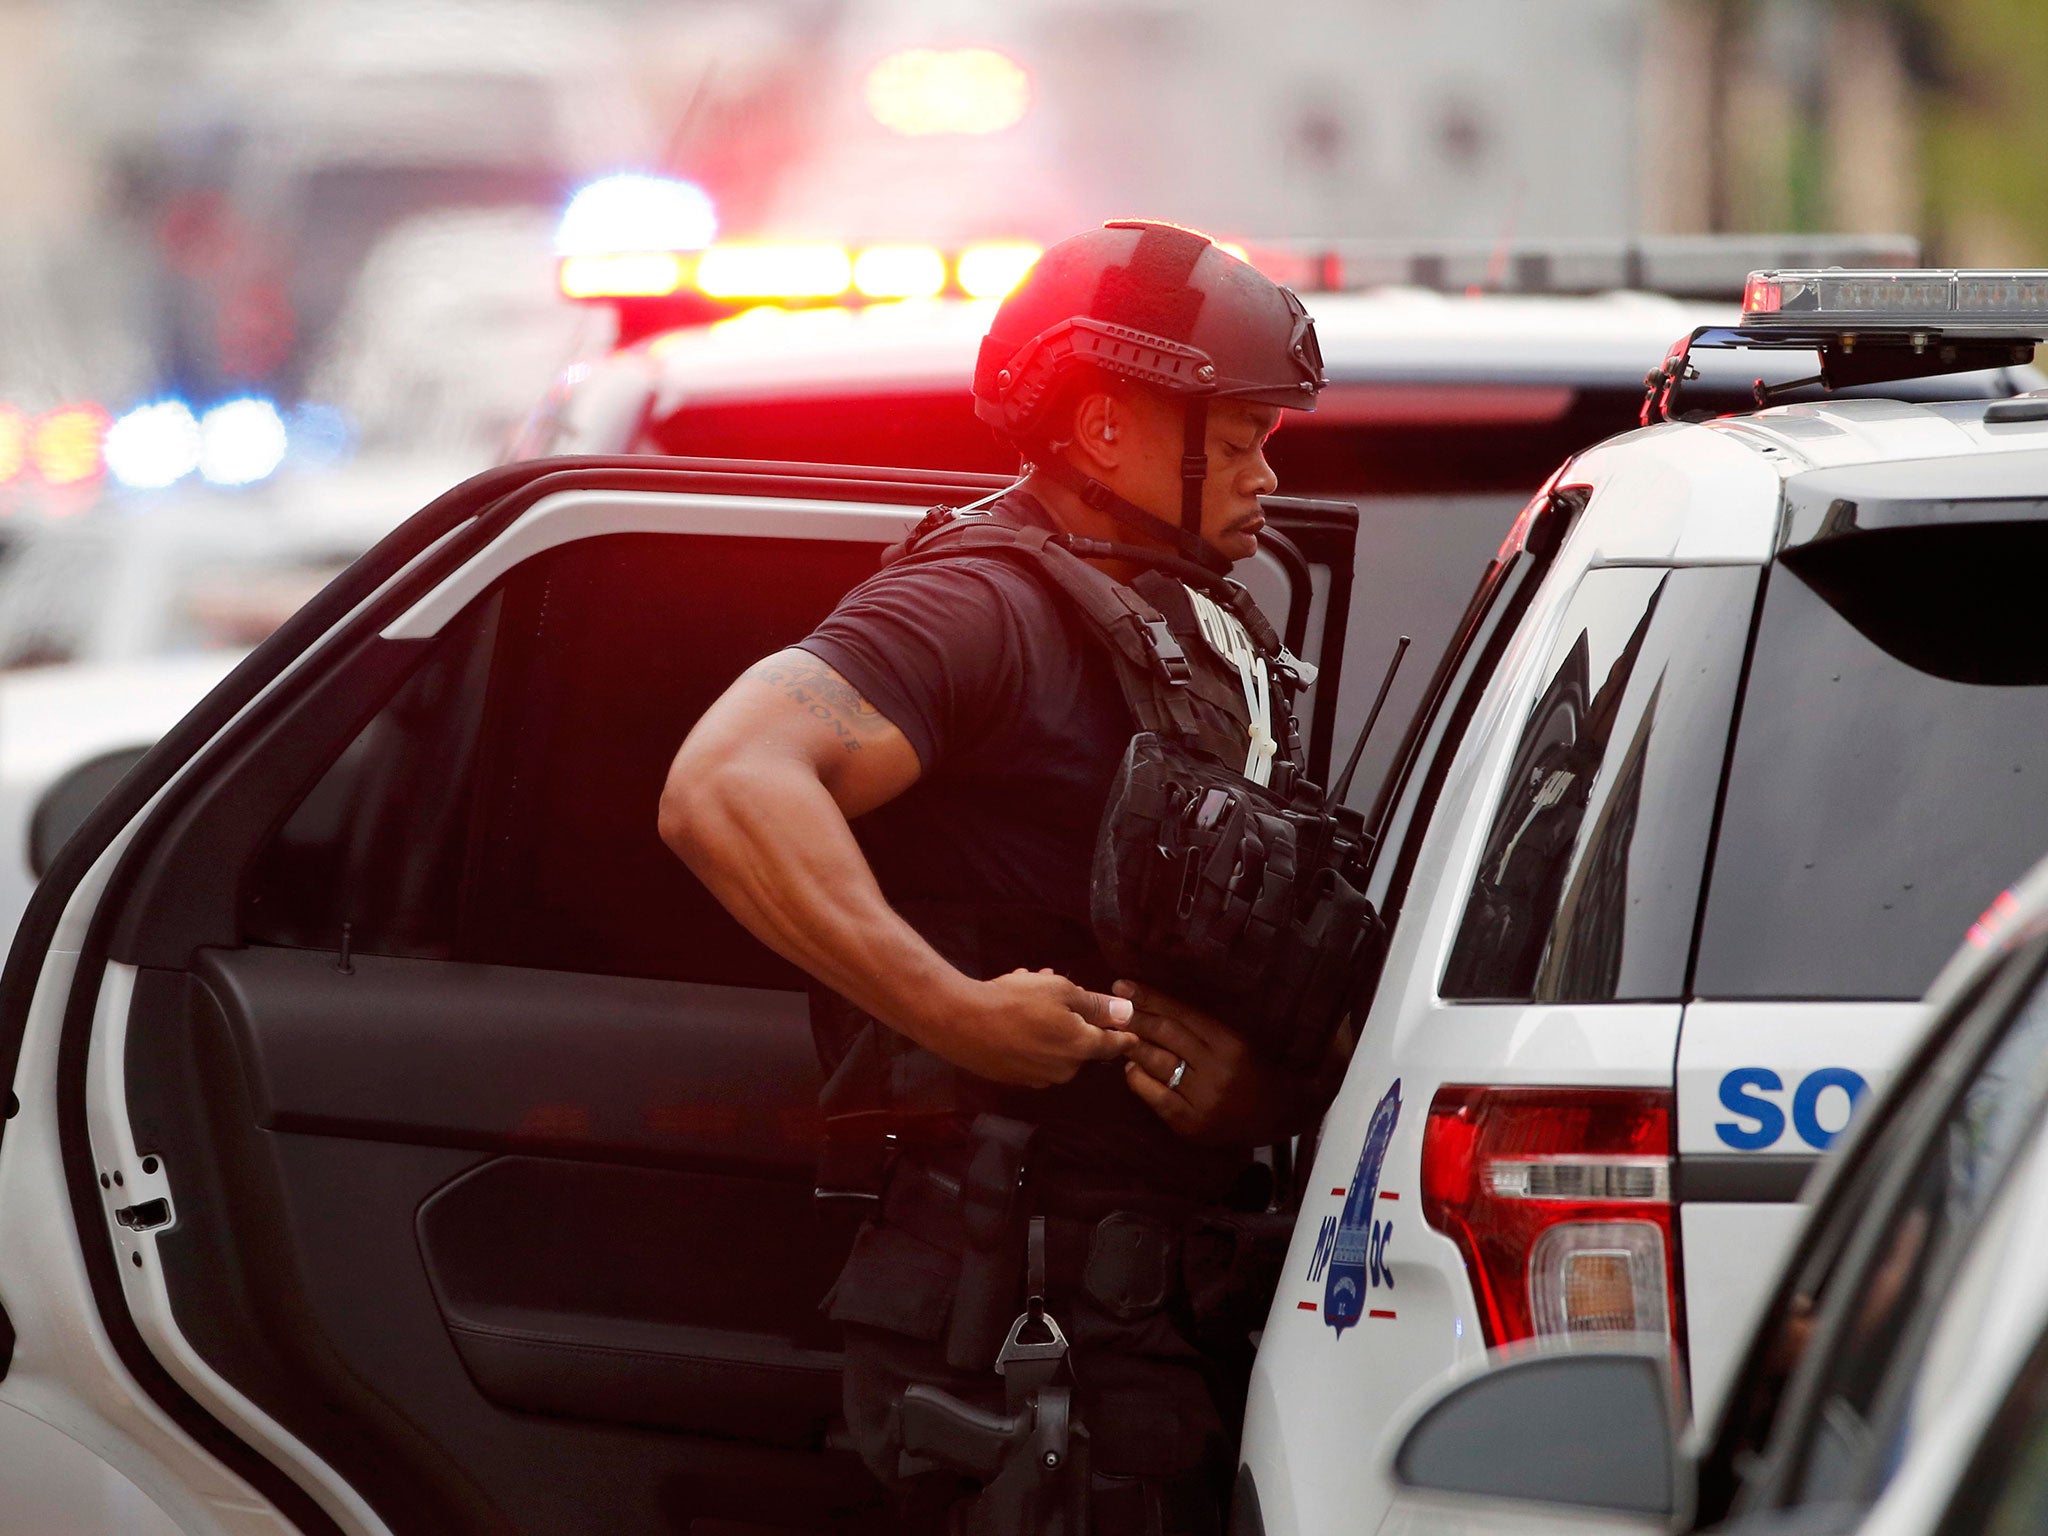 Police respond to reports of a shooting and subsequent lockdown at the U.S. Navy Yard in Washington